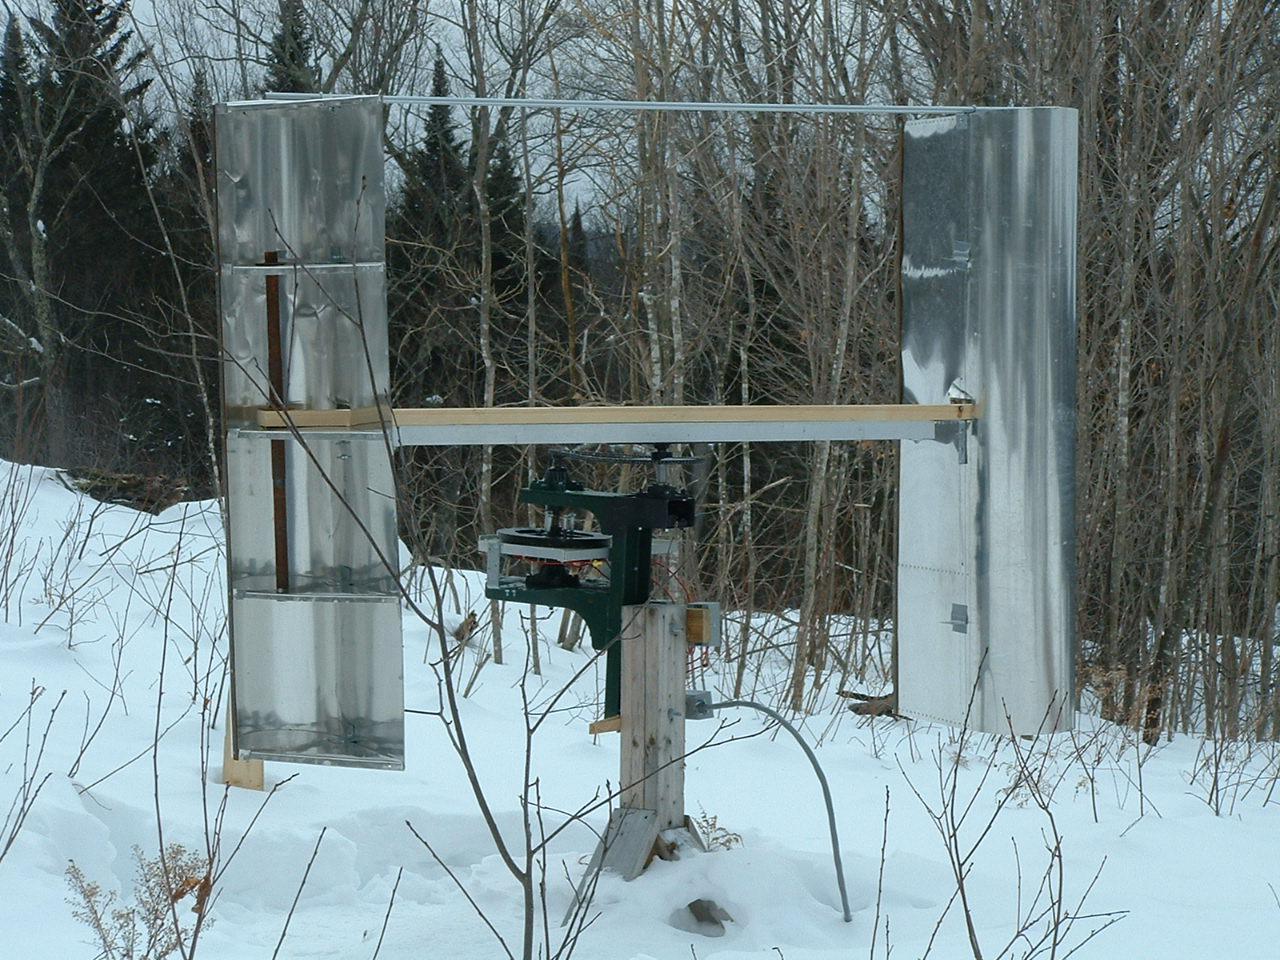 Vertical Axis Wind Turbine DIY Guide - The Green Optimistic